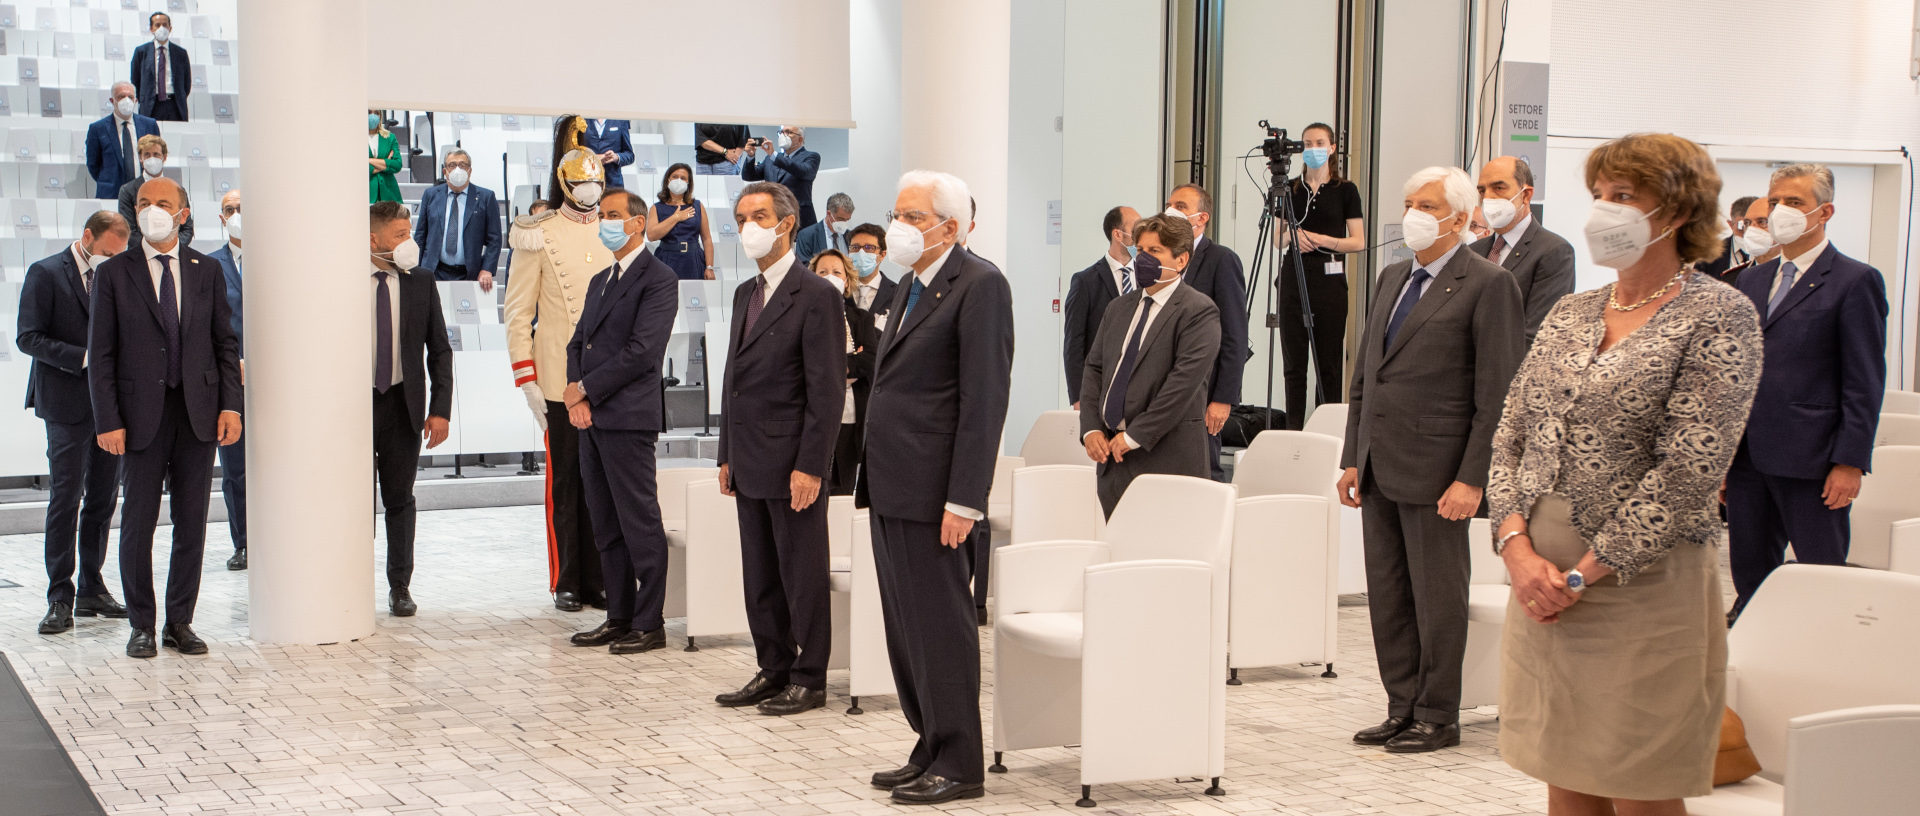 The authorities at the inauguration of the new Architecture Campus